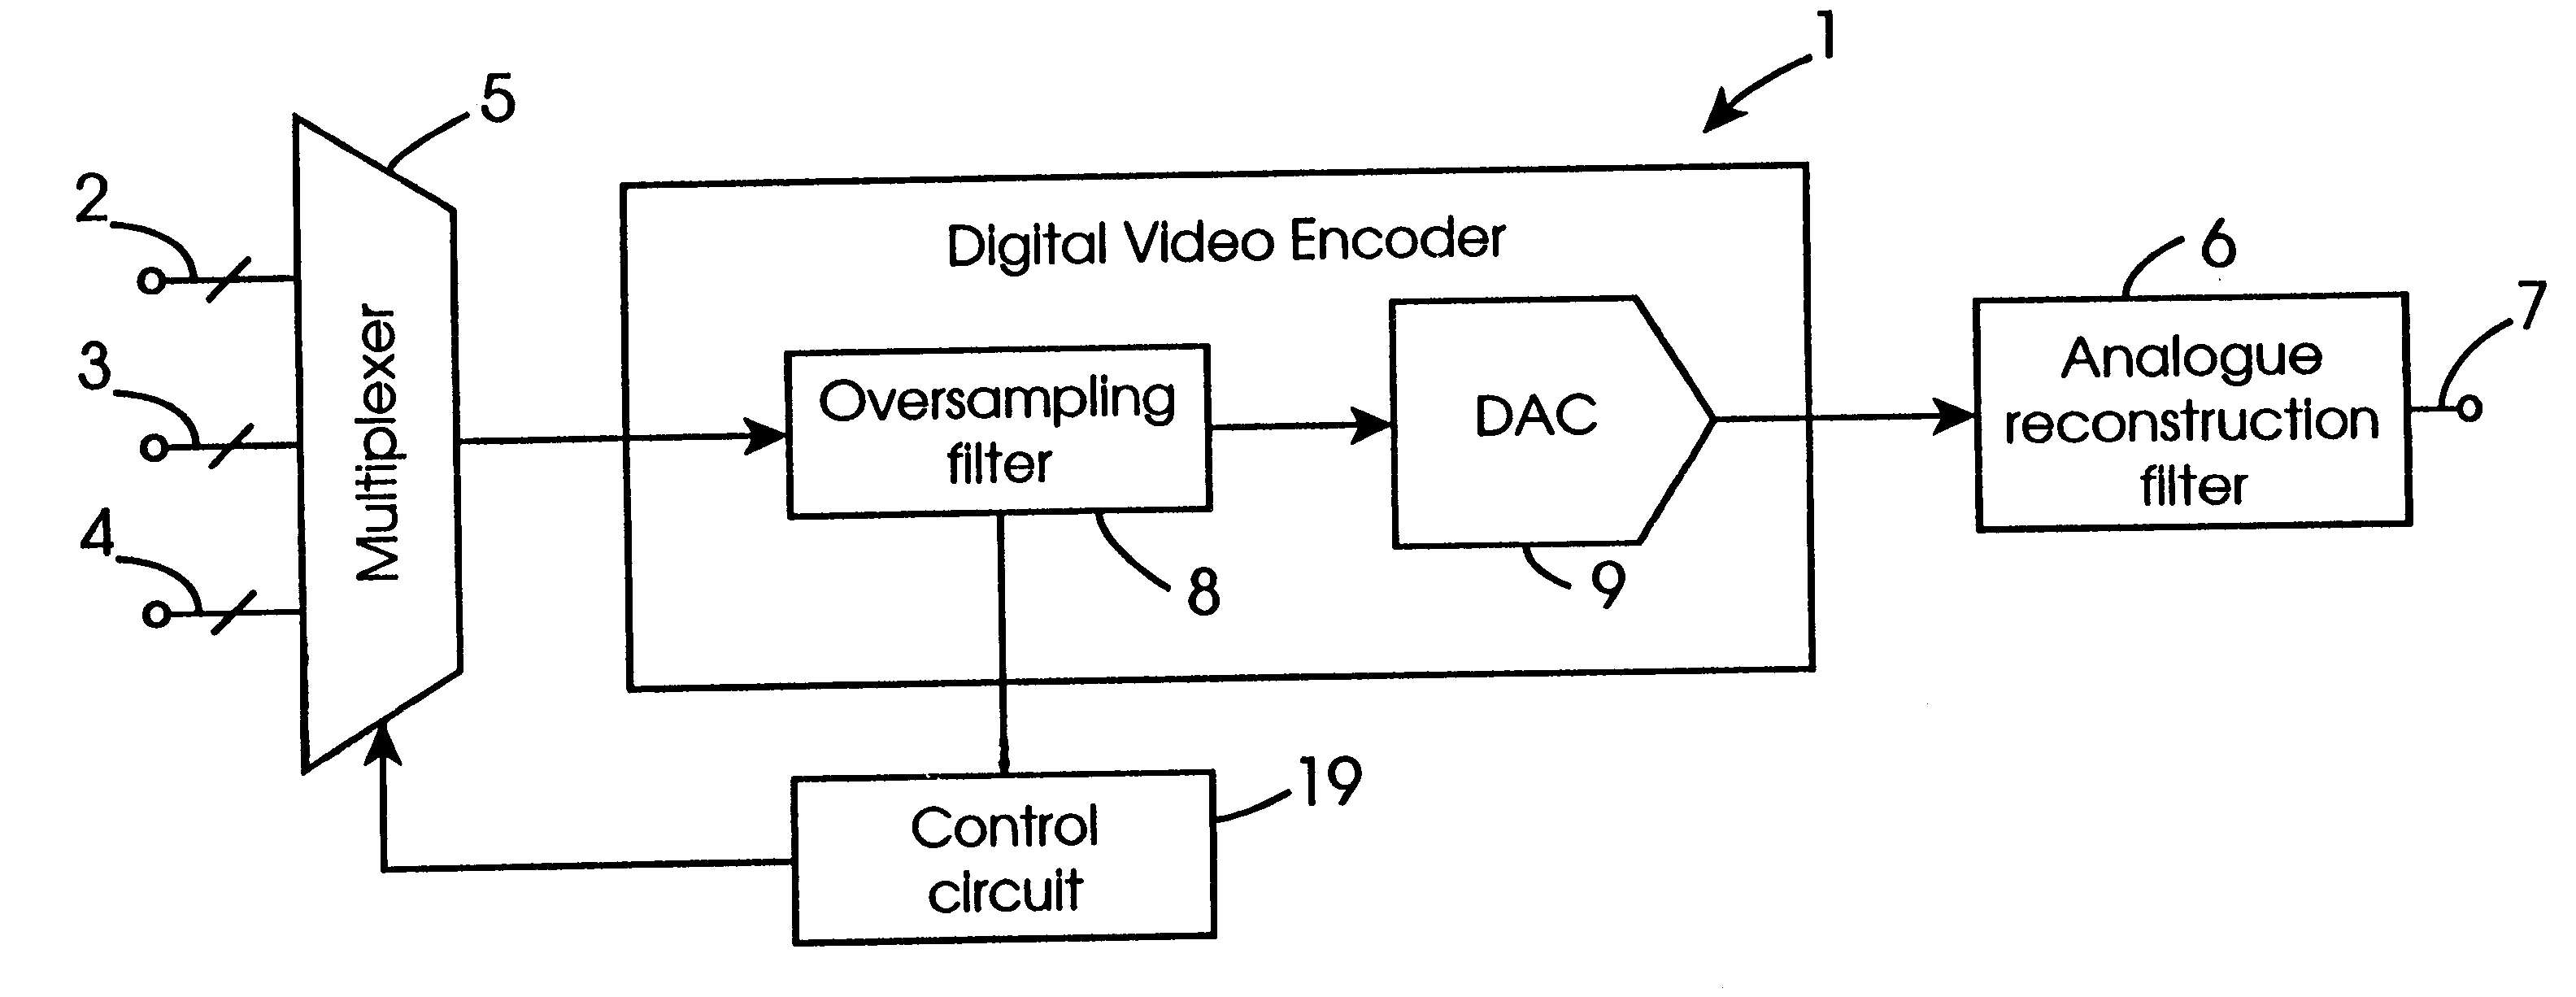 Method for converting a plurality of signals from one of a digital and analogue form to the other form